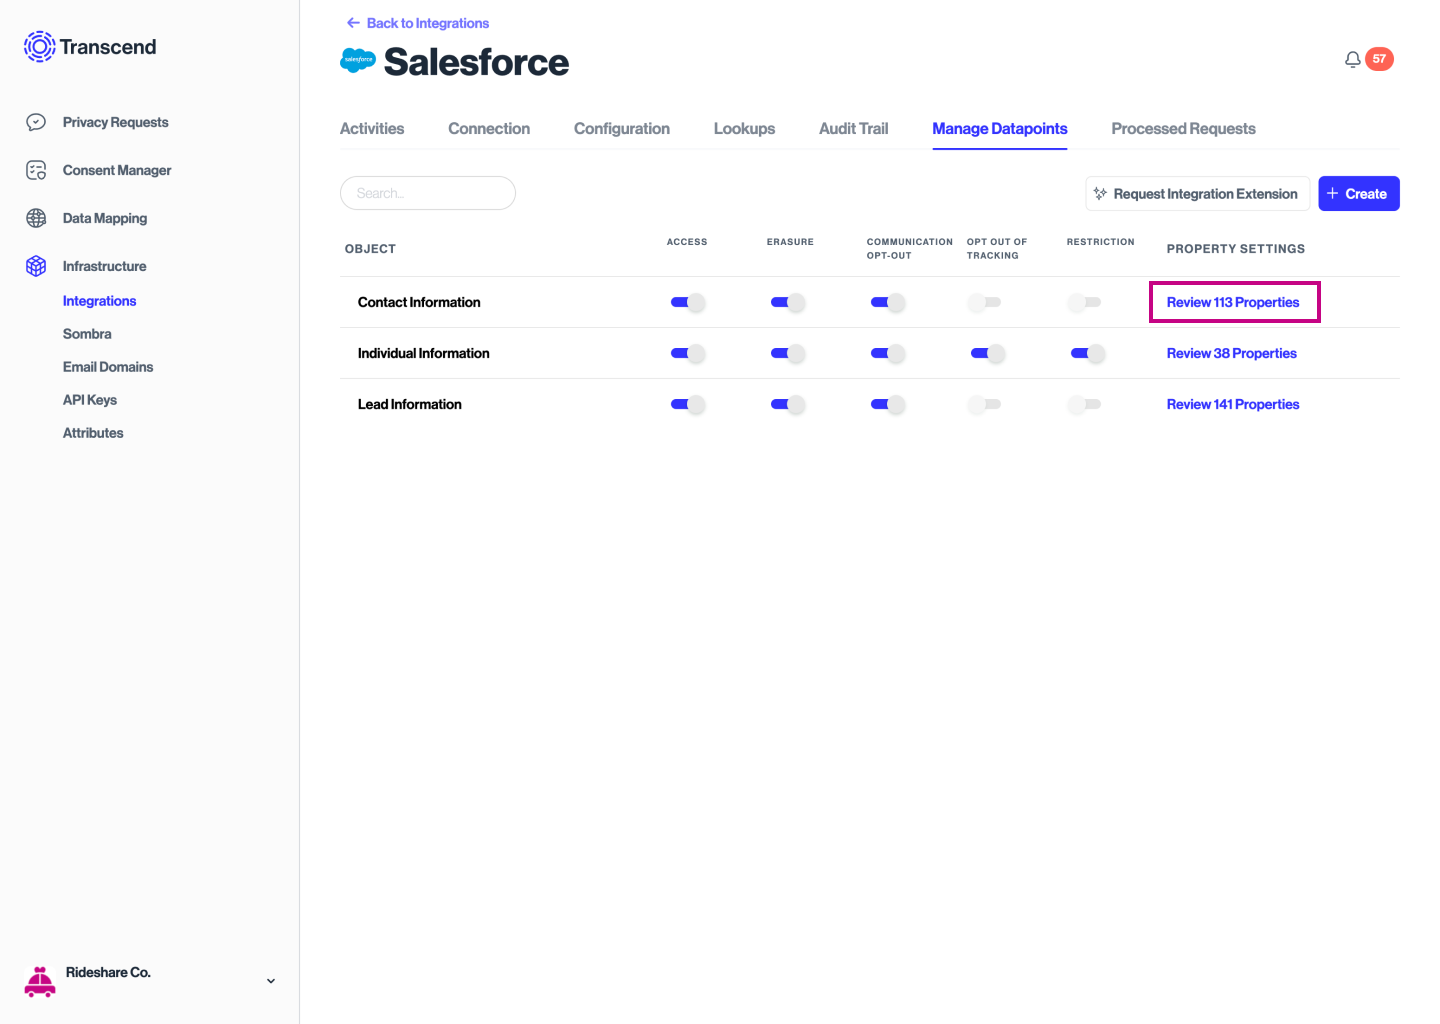 Review Property Settings in Salesforce datapoints